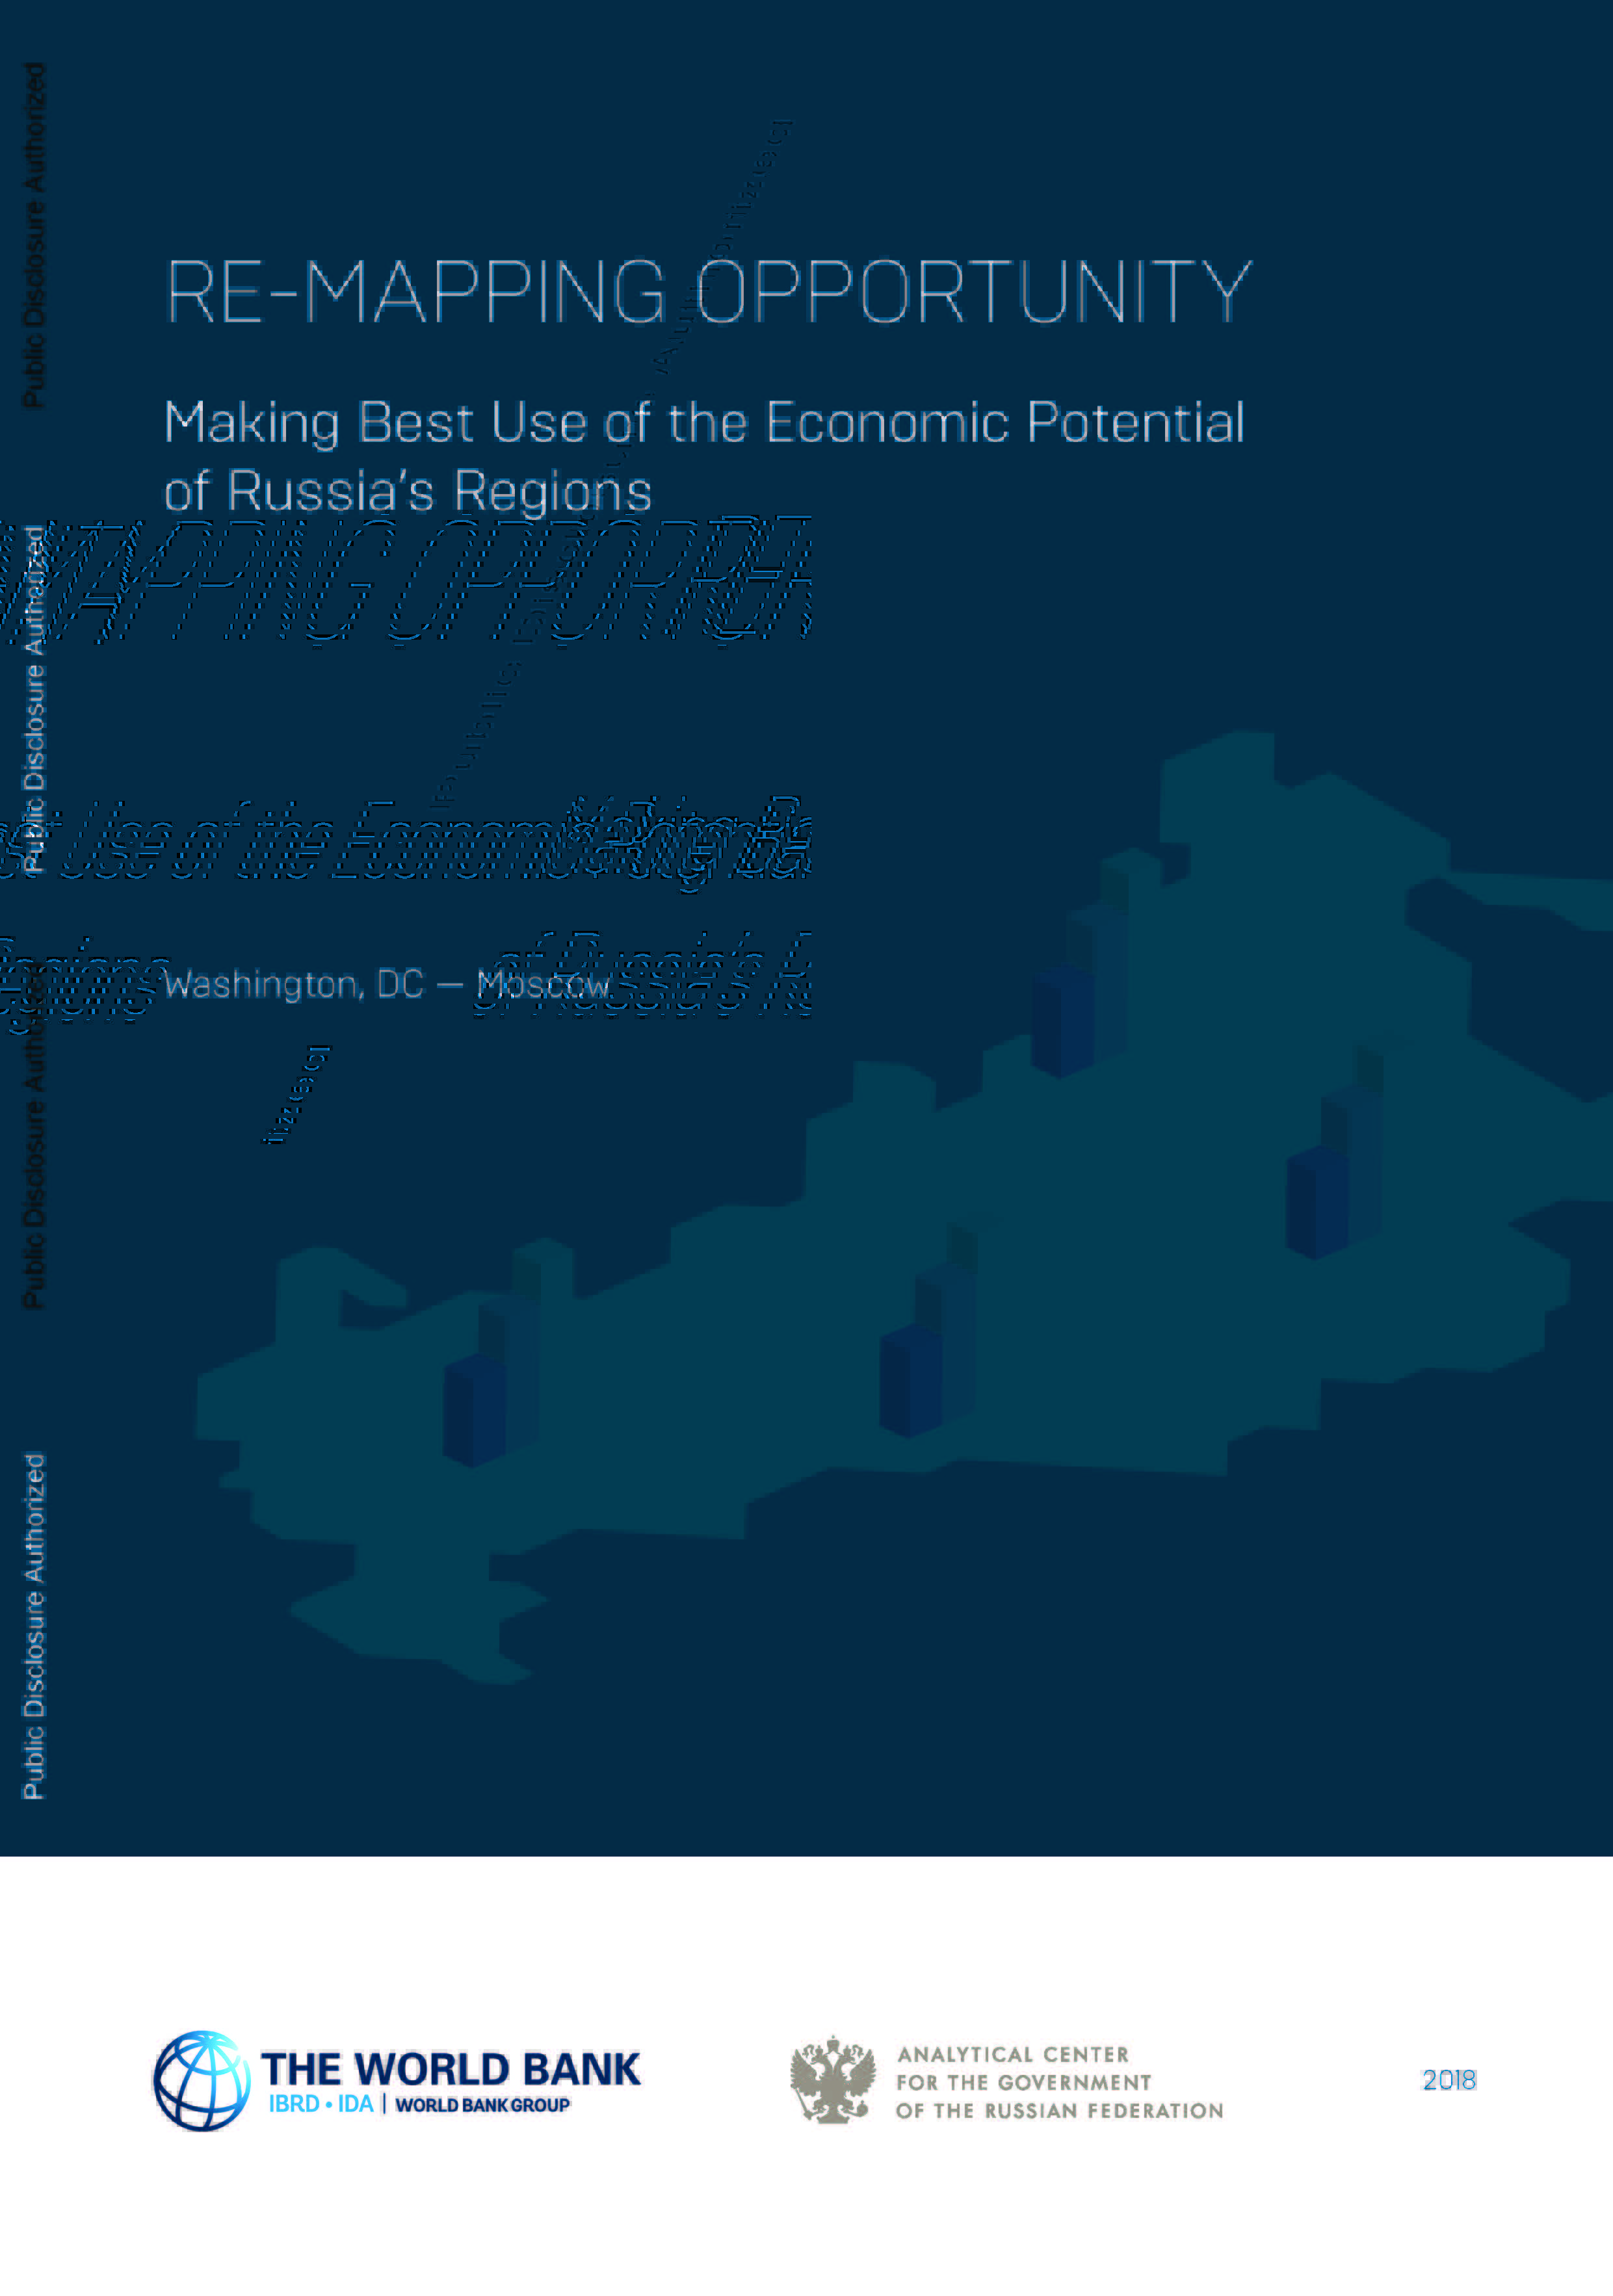 Re-mapping opportunity: making best use of the economic potential of Russia's regions